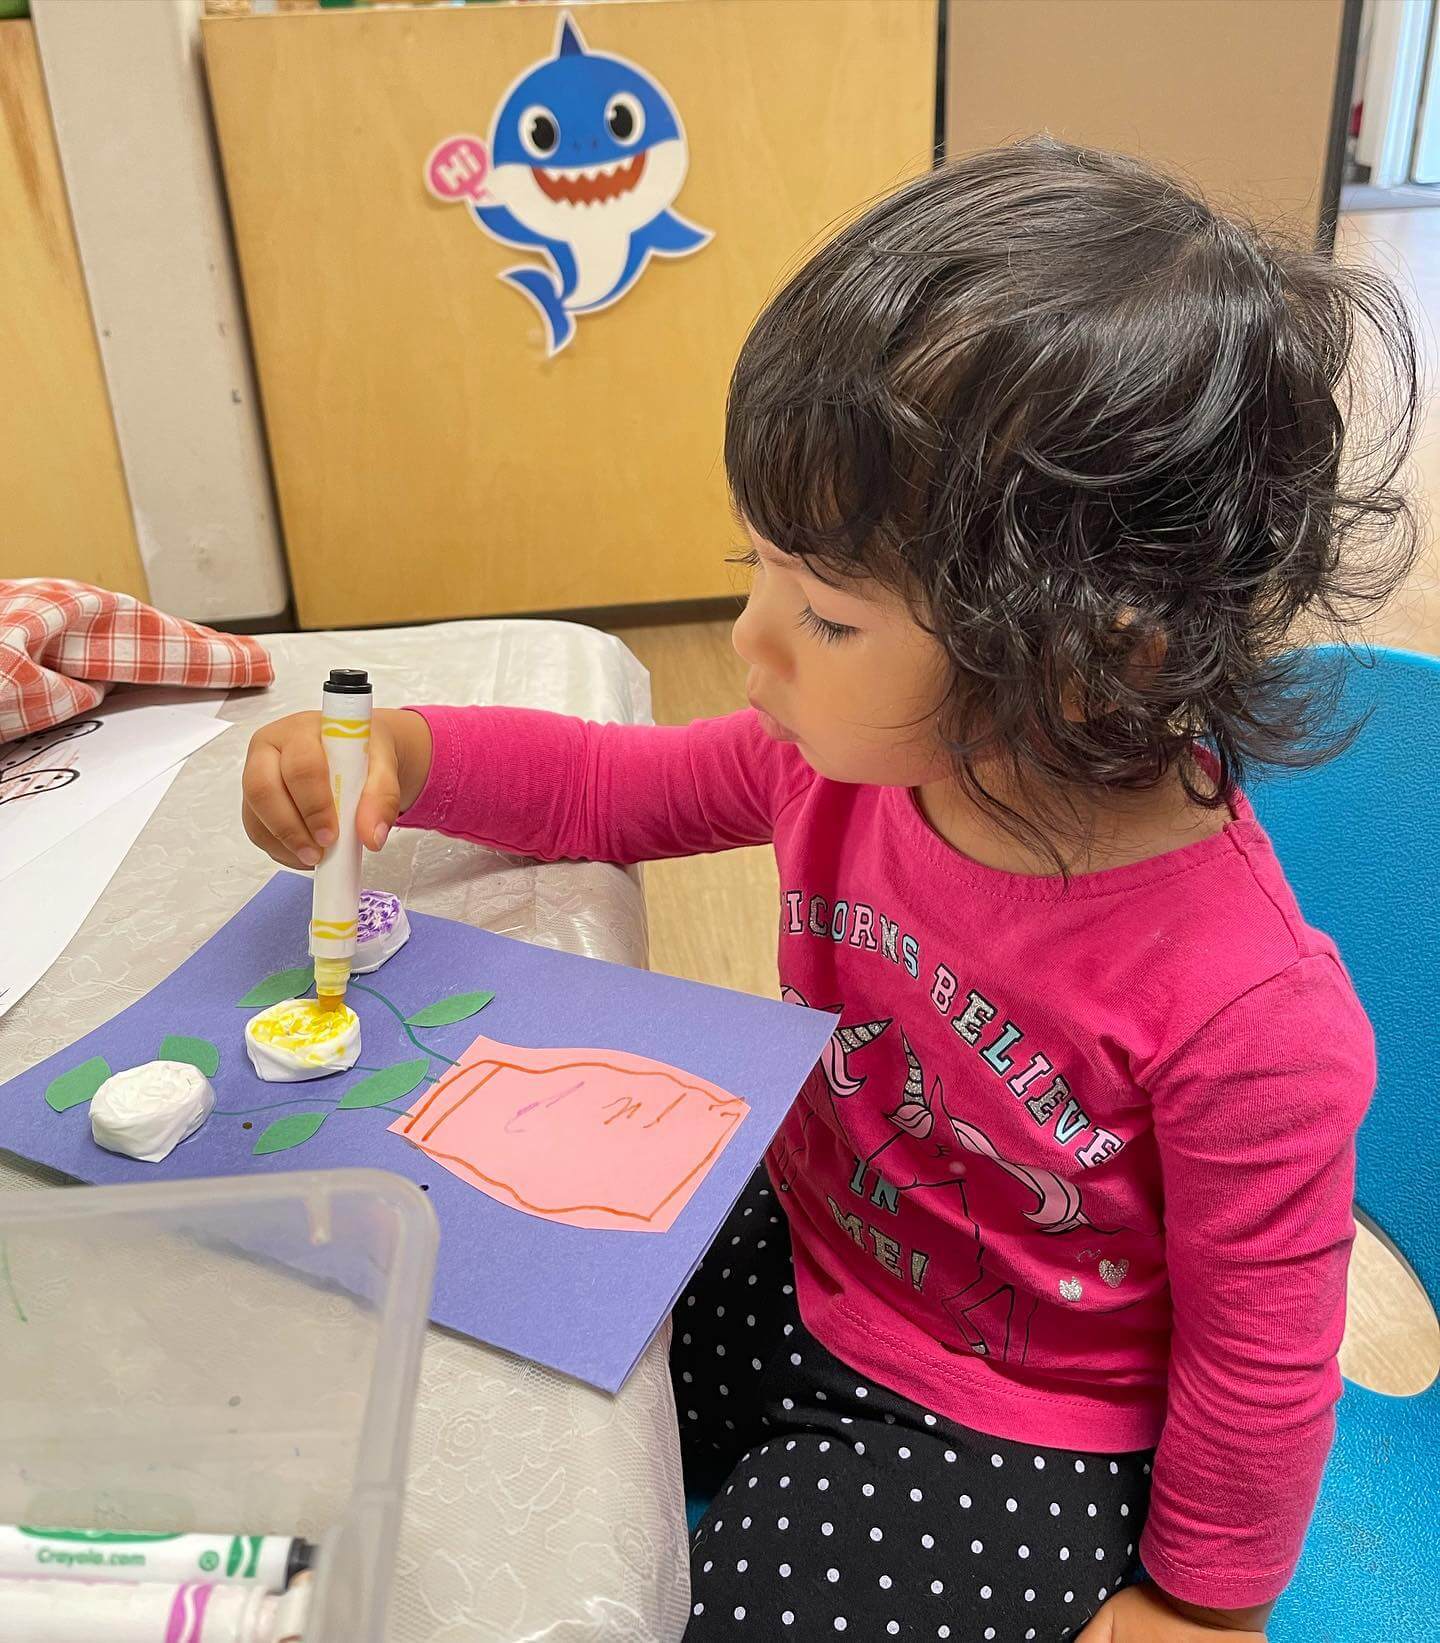 Milestones Academy Childcare Center - The Path to Successful Childhood Education - Gallery